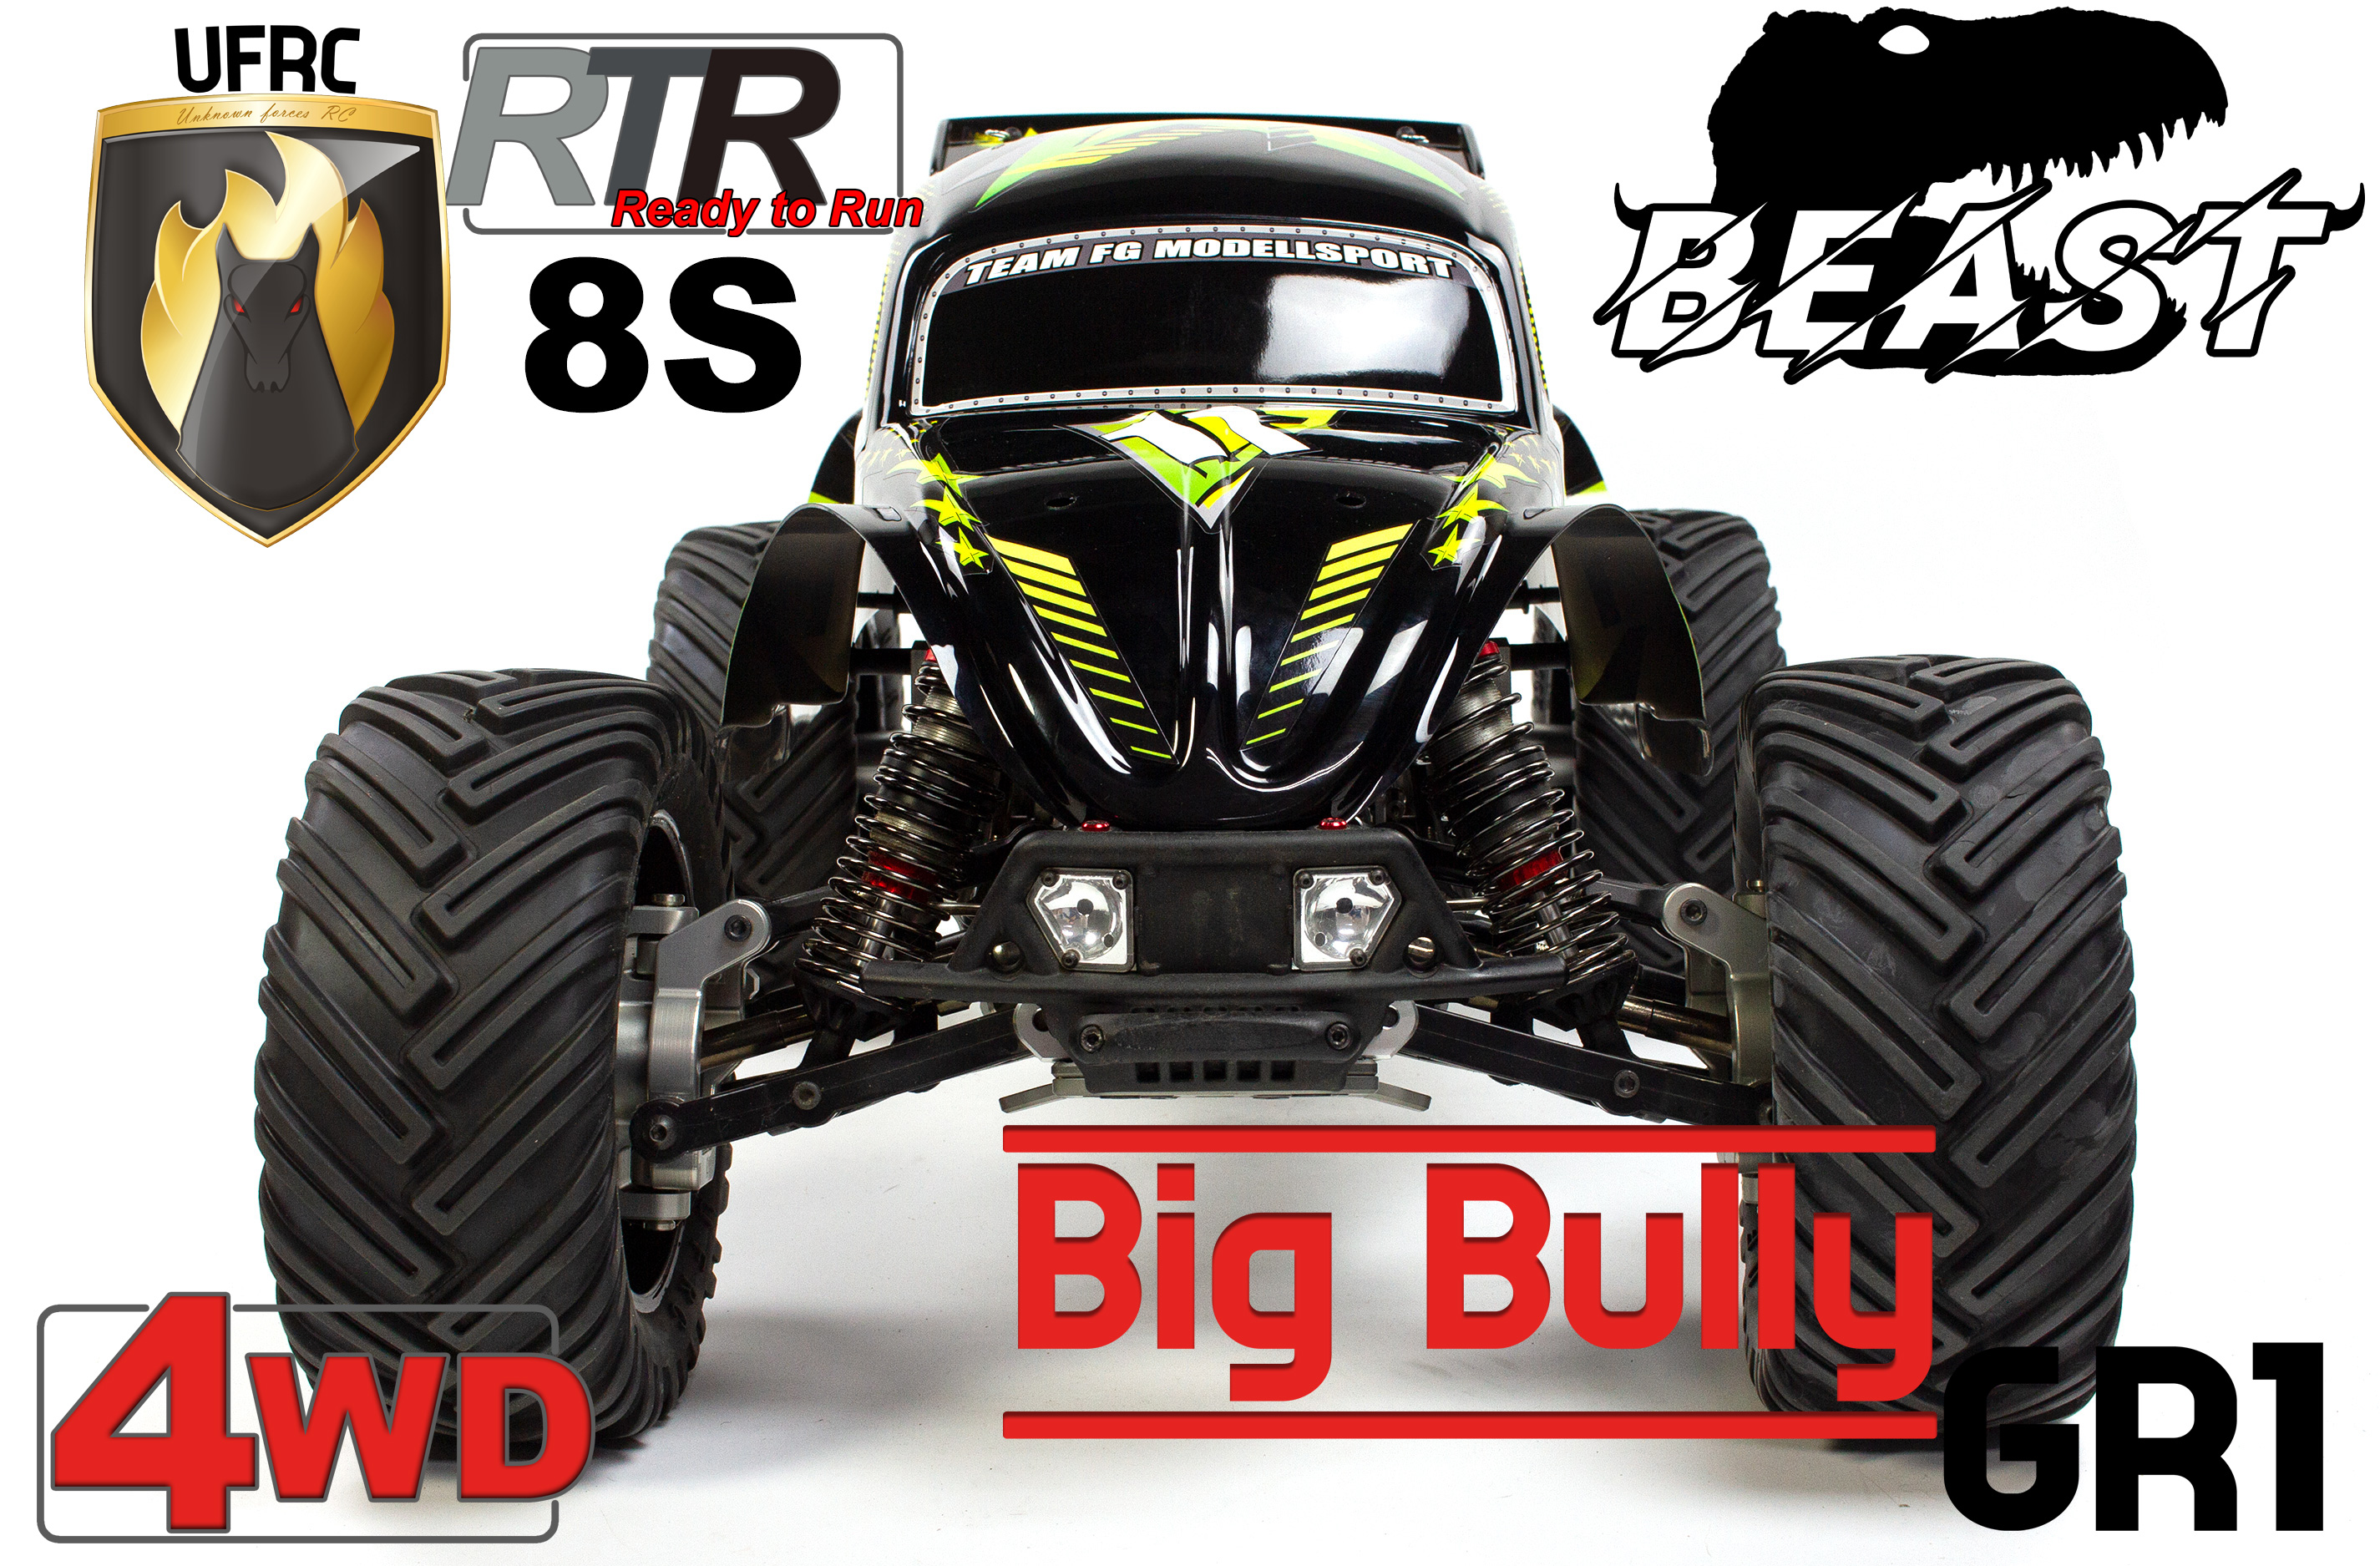 UFRC Big Bully GR1 4WD 1:5 Brushless Buggy 8S, RTR Version